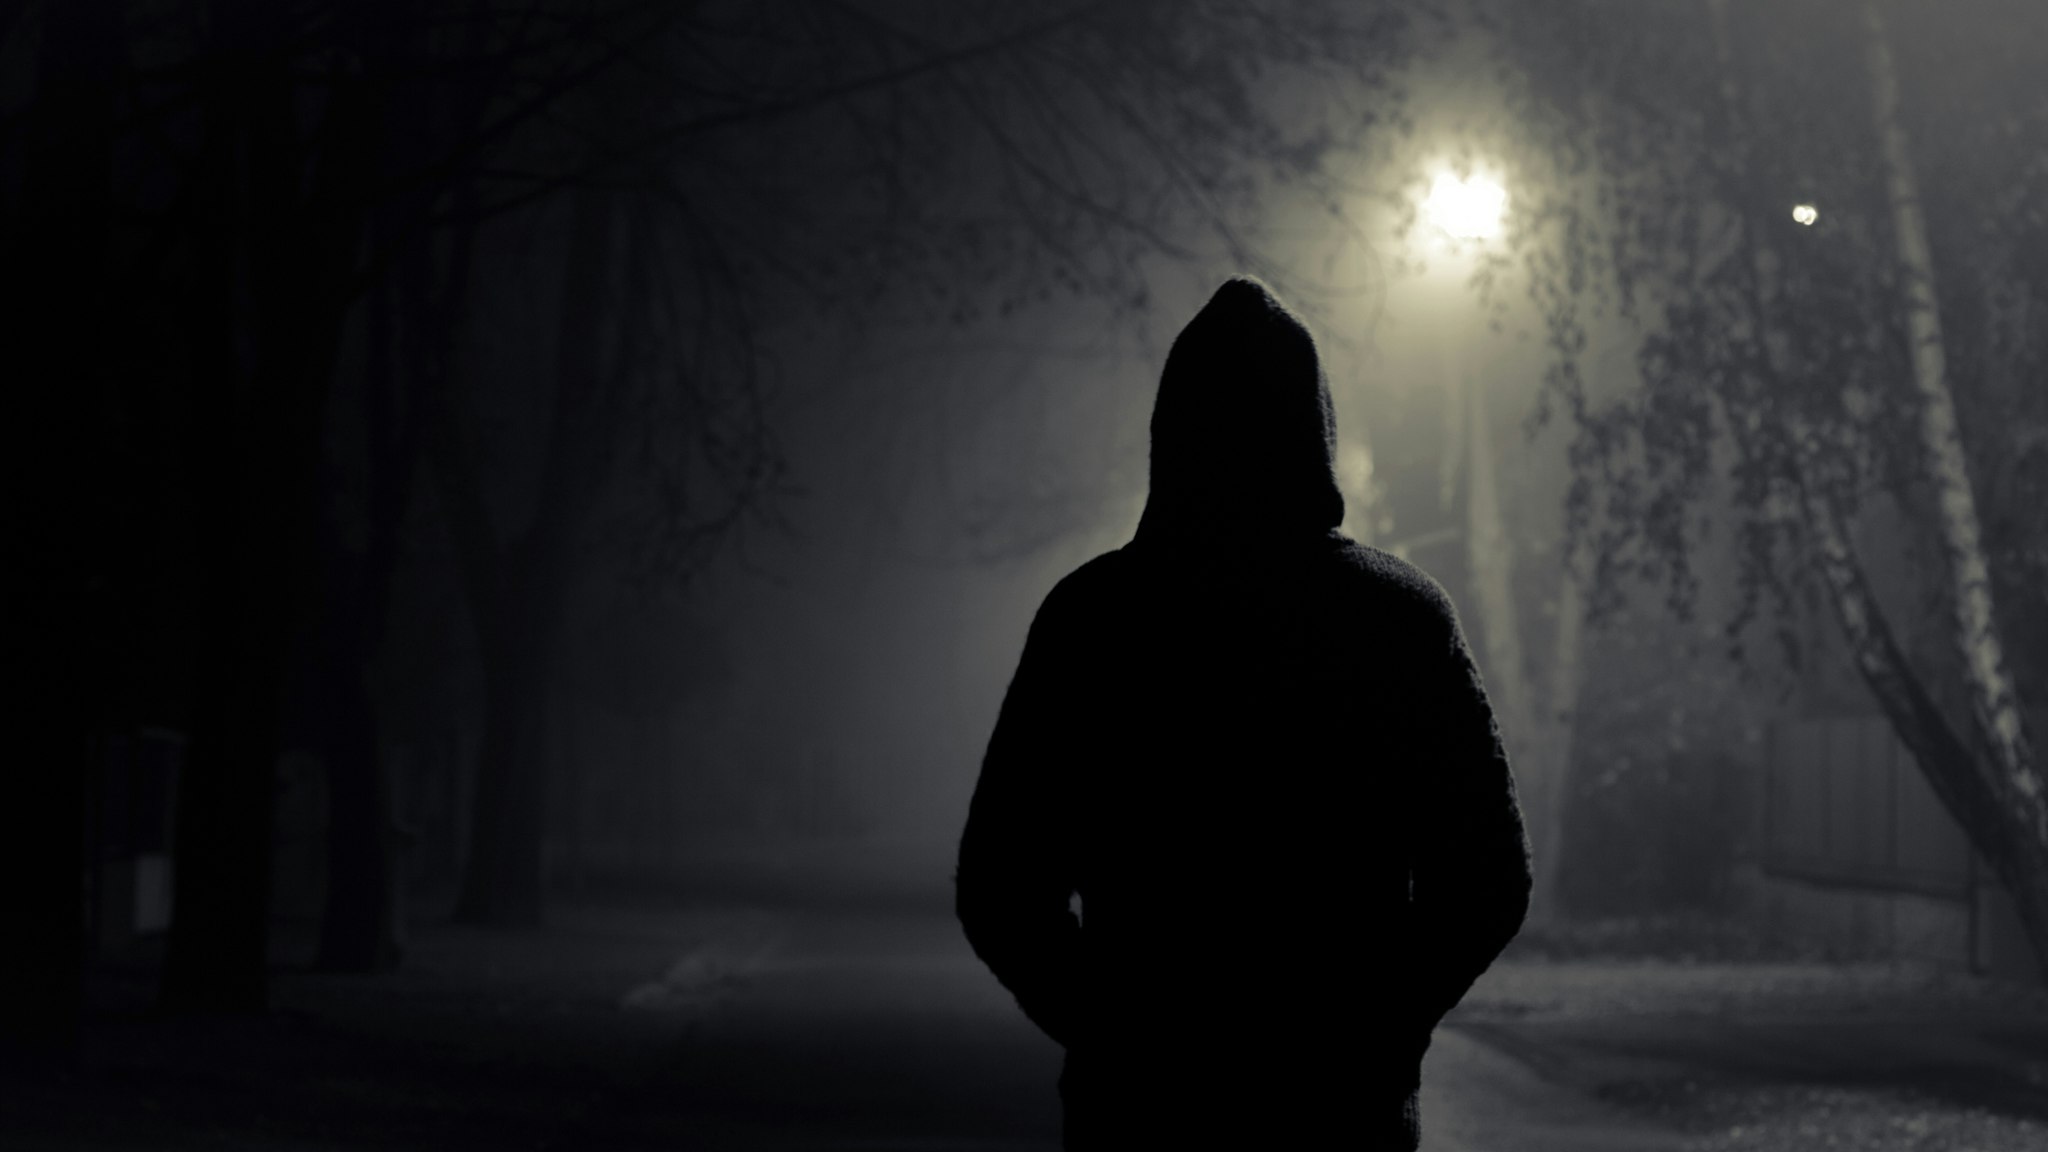 Silhouette of hooded person with spooky dark background - stock photo